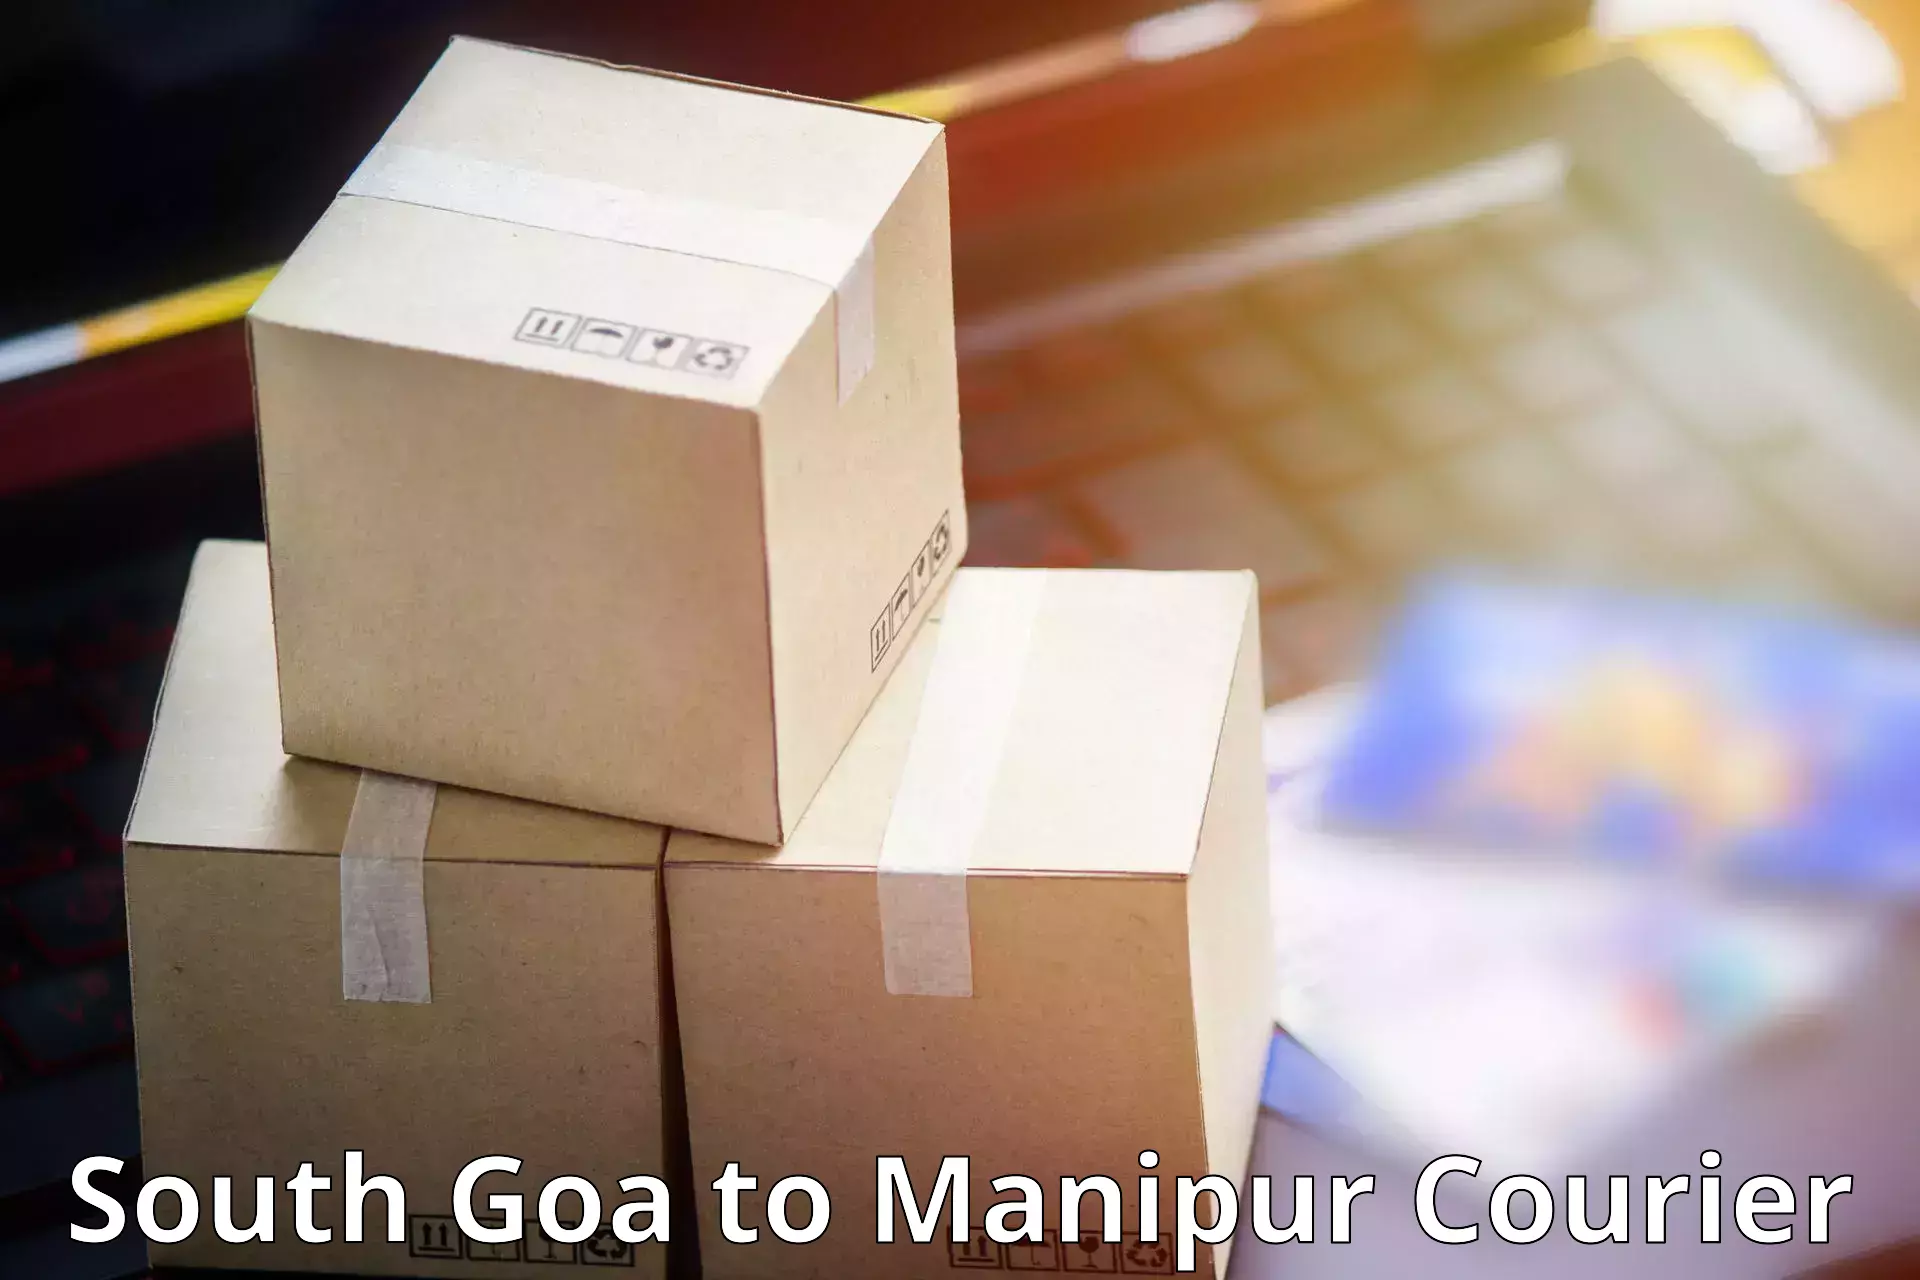 Air courier services in South Goa to Imphal